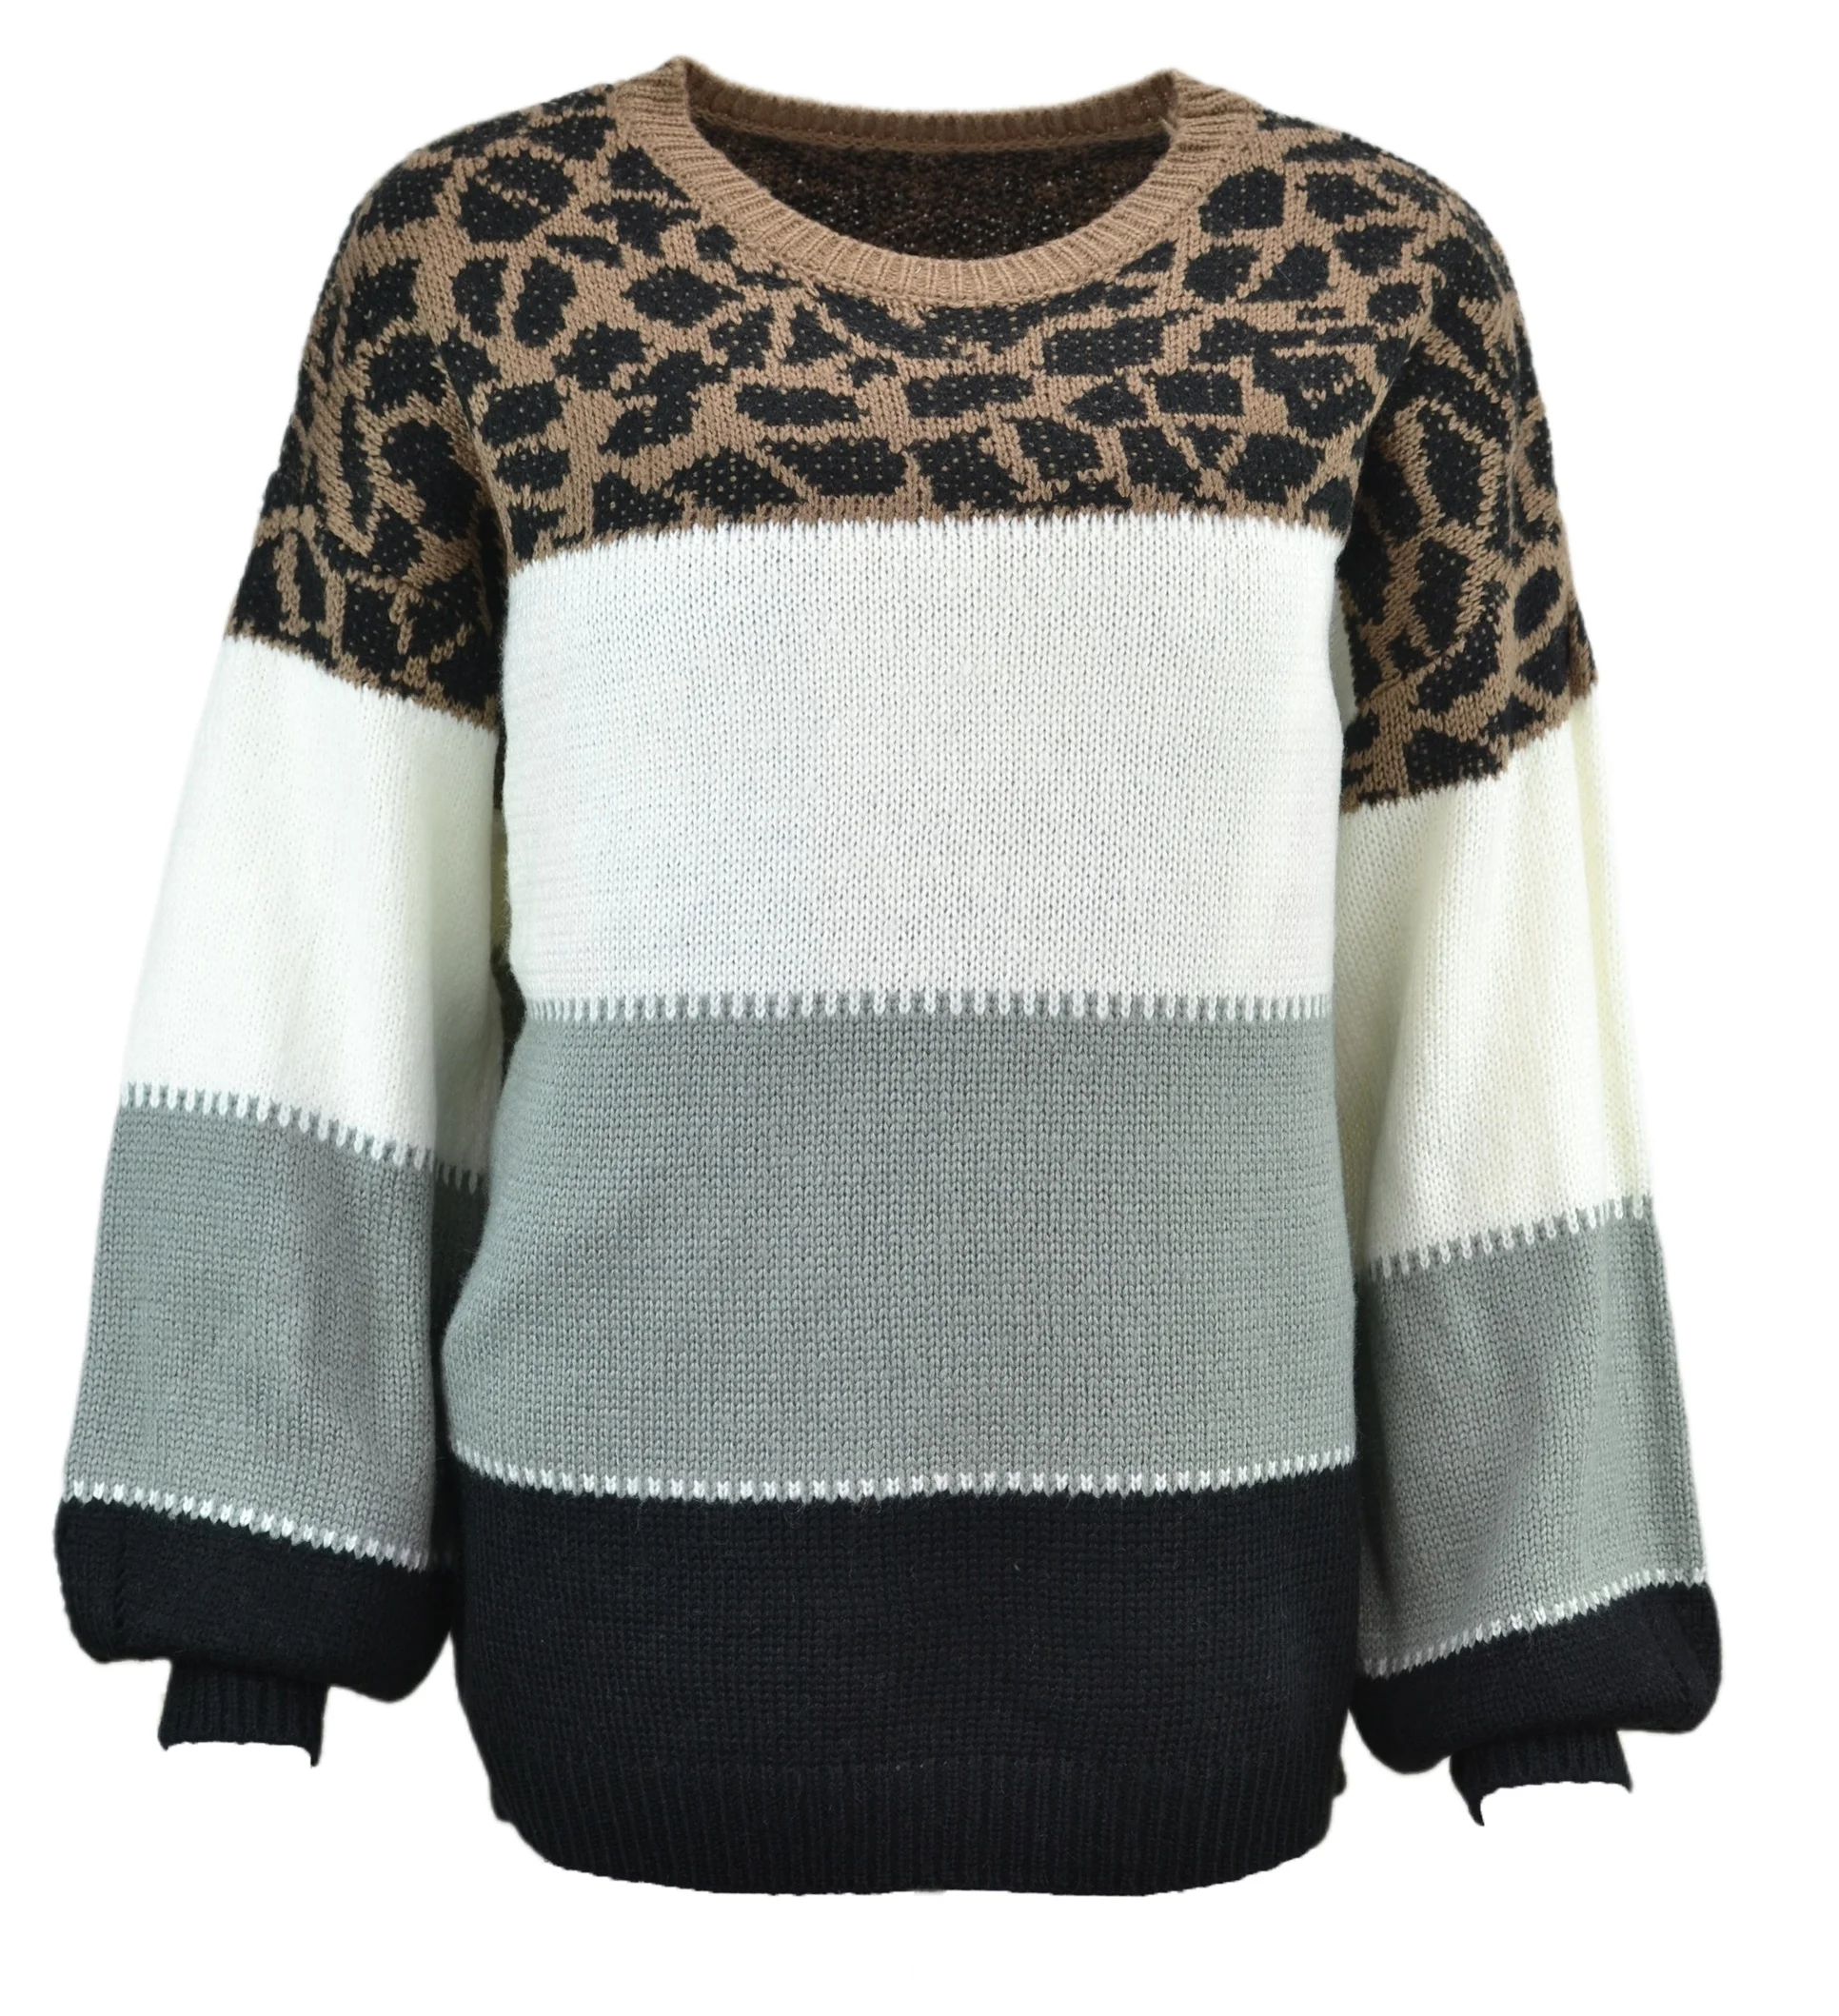 

New Arrival Autumn Contrast Color Loose O Neck Full Sleeve Pullover Sweater Oversize Knitwear For Woman, Picture shown